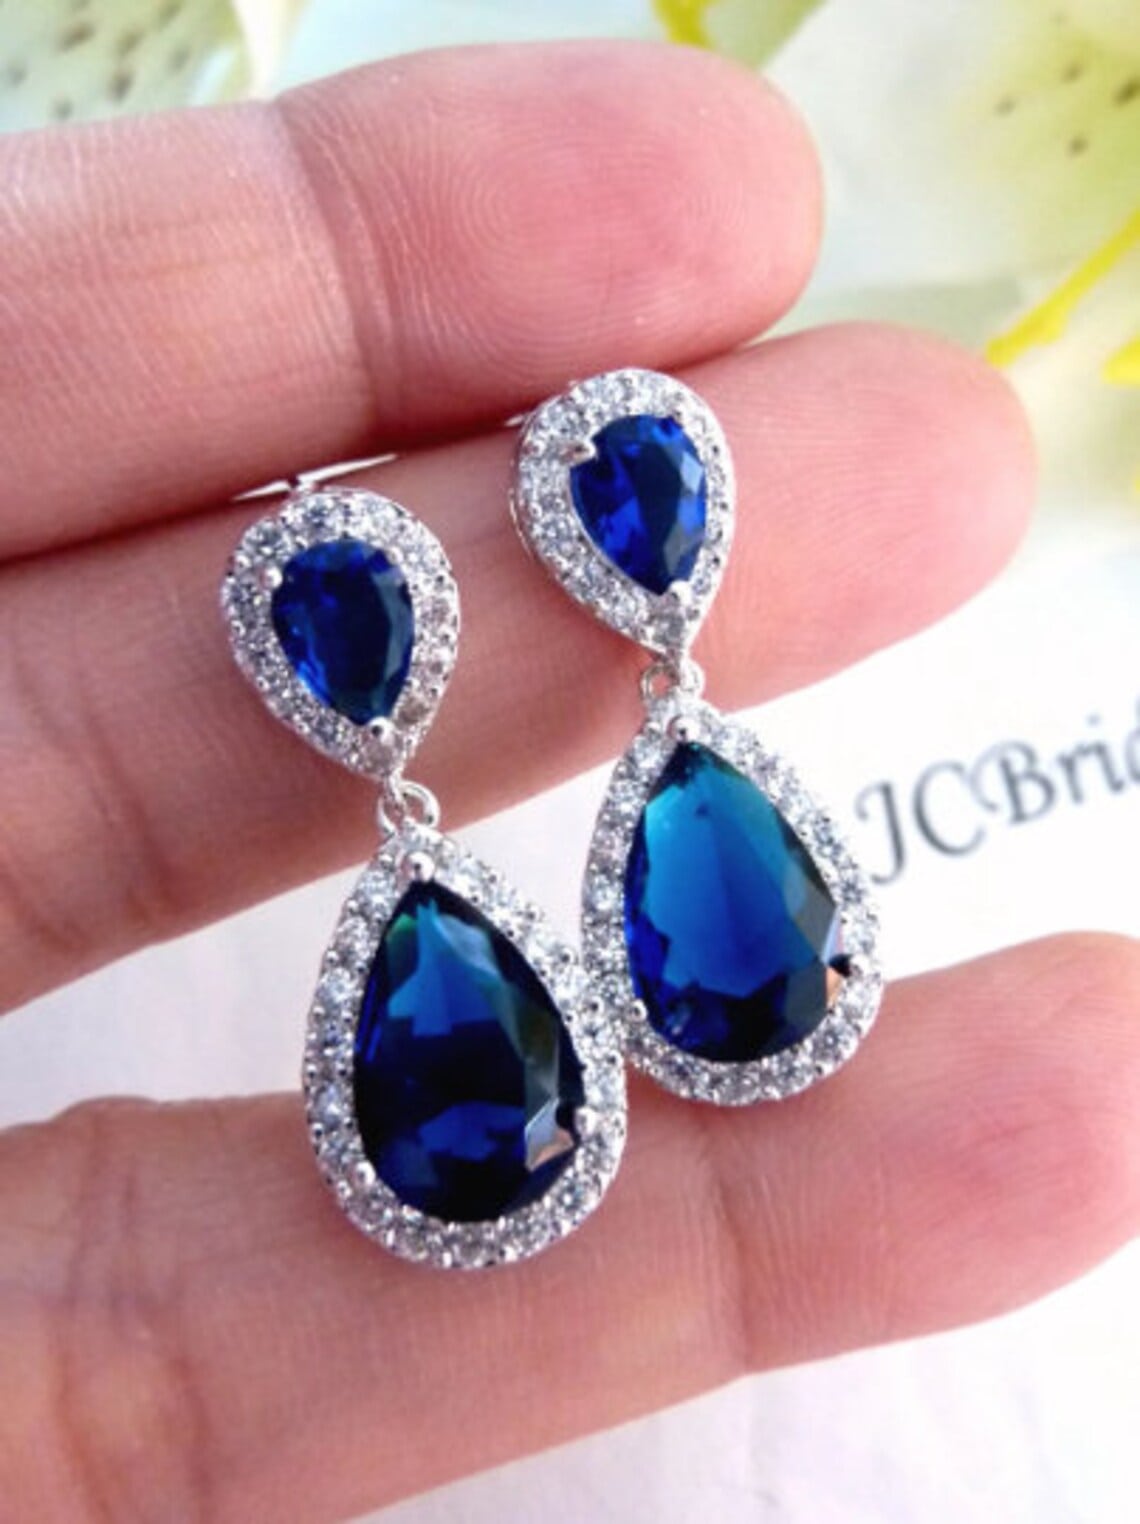 Cubic zirconia and sapphire earrings